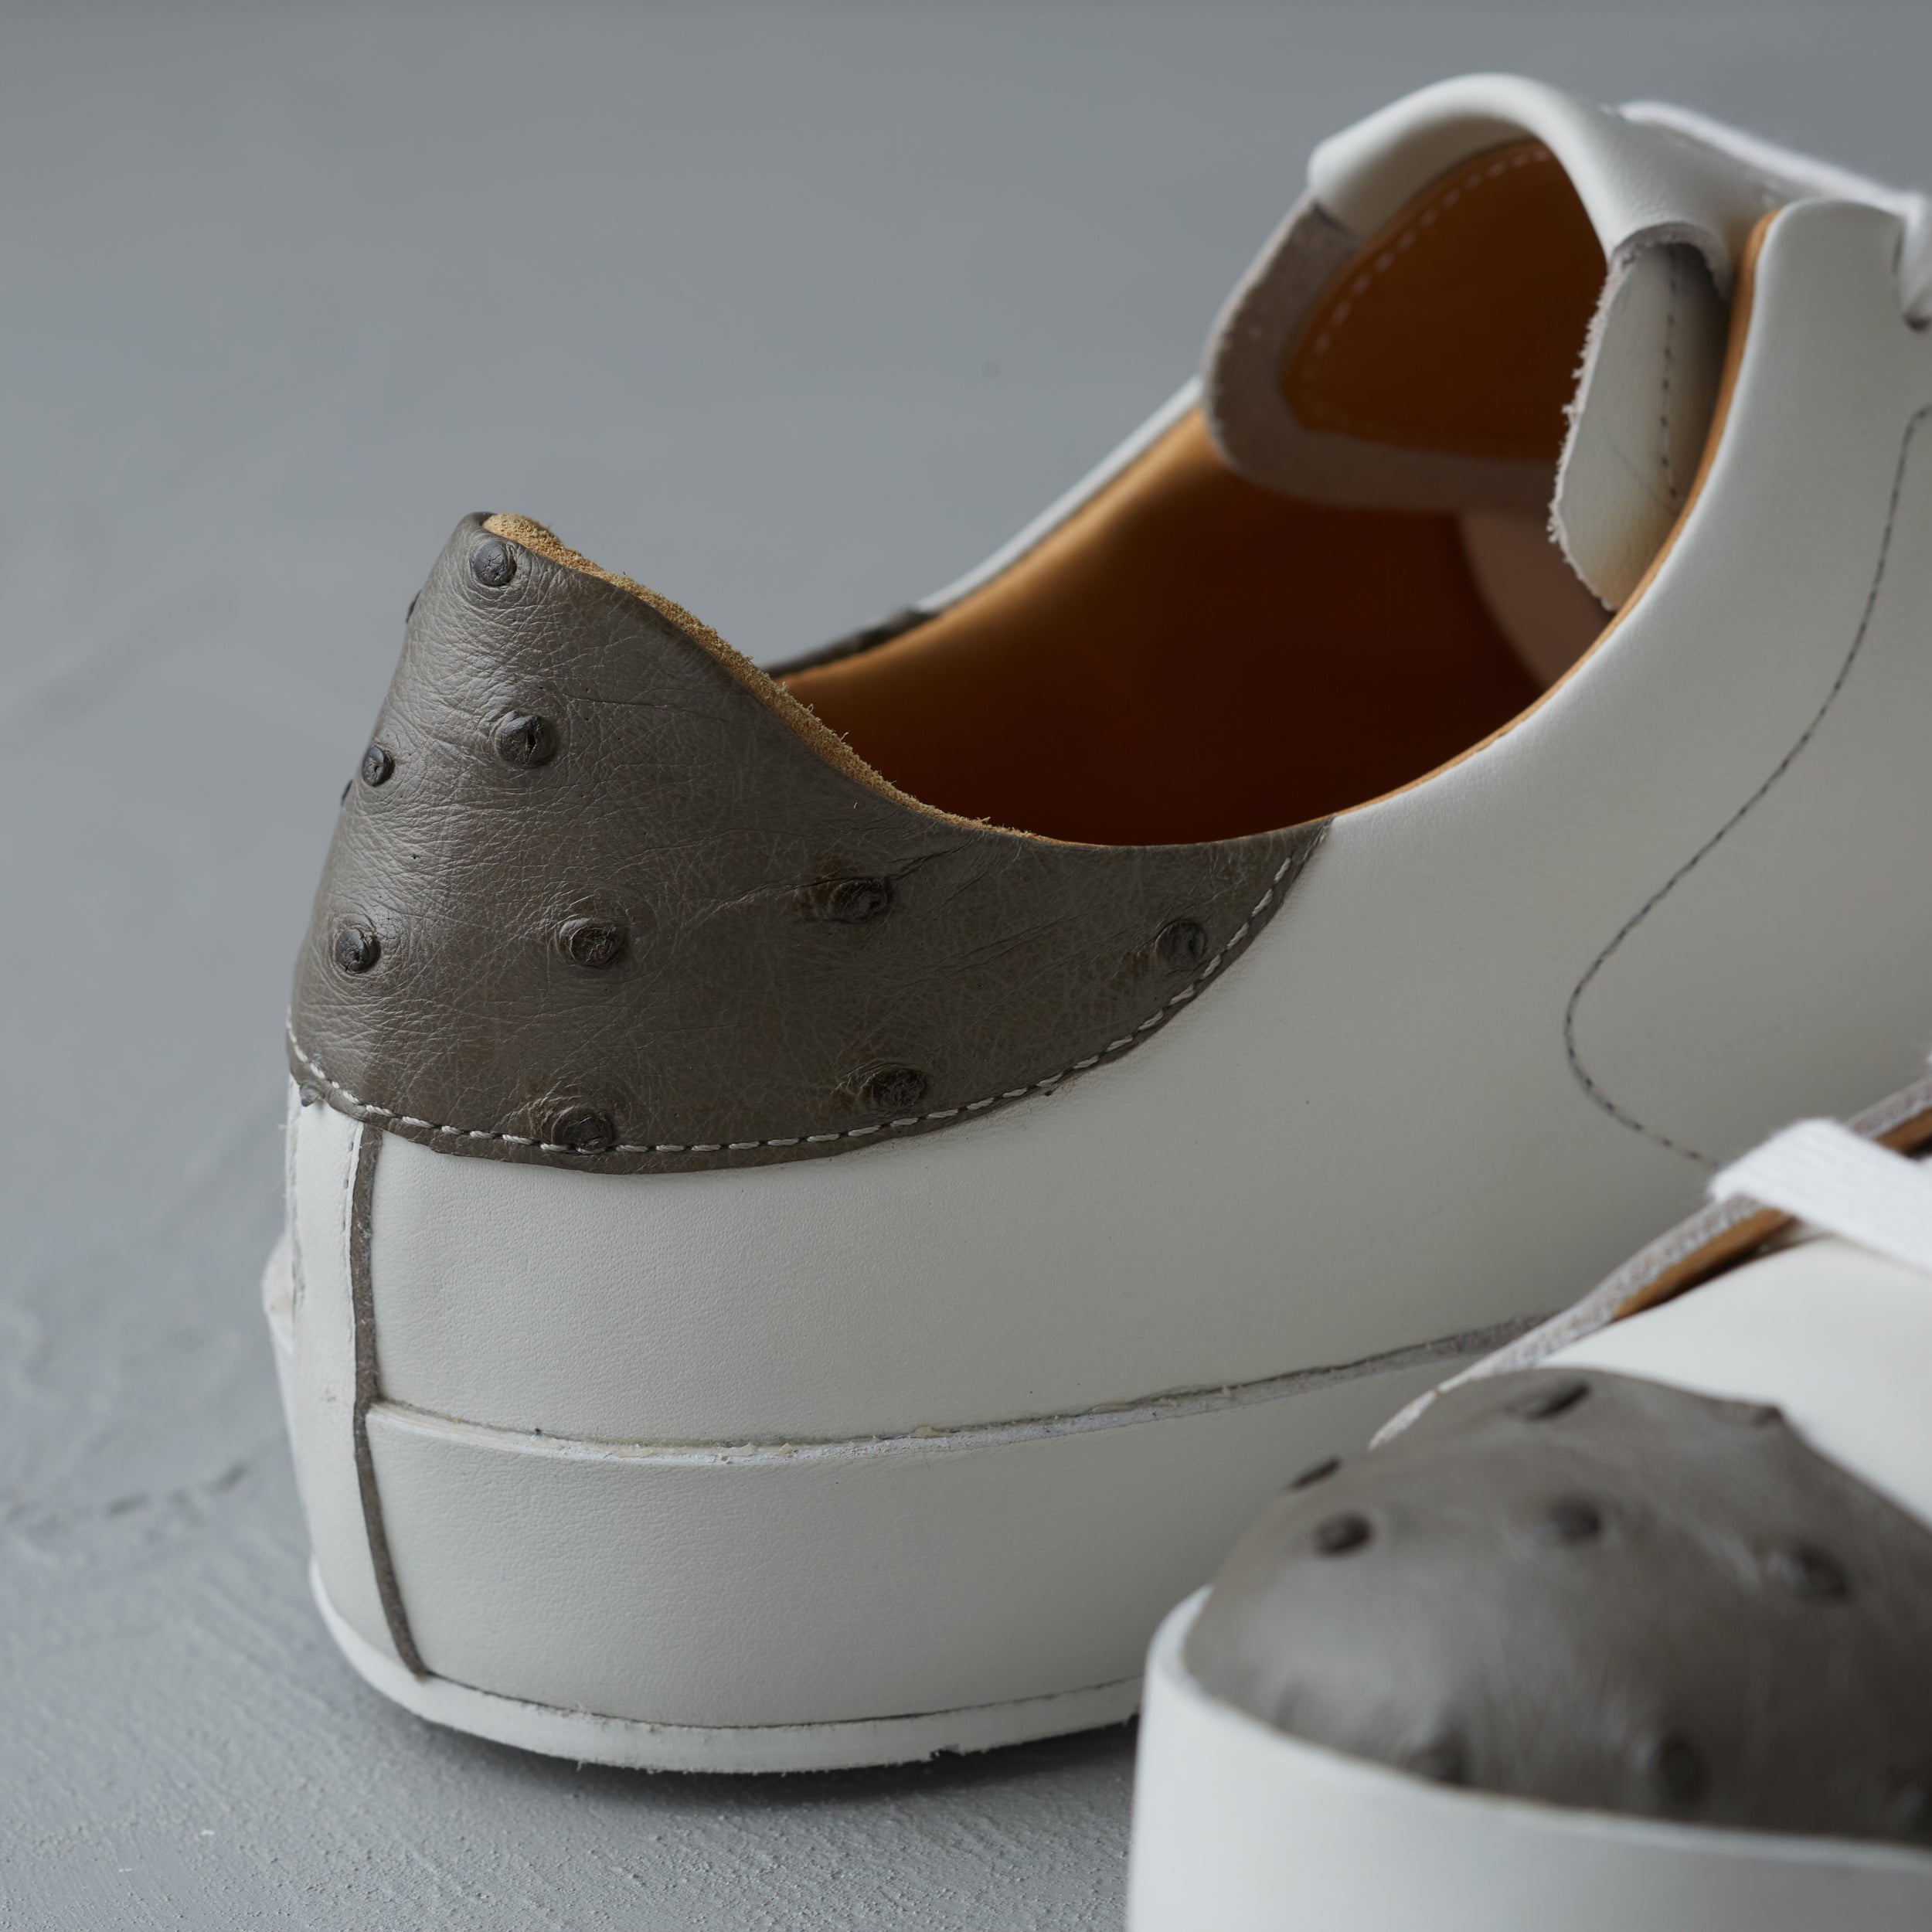 [women's] Liberte - low-top sneakers - combination toe white and gray ostrich